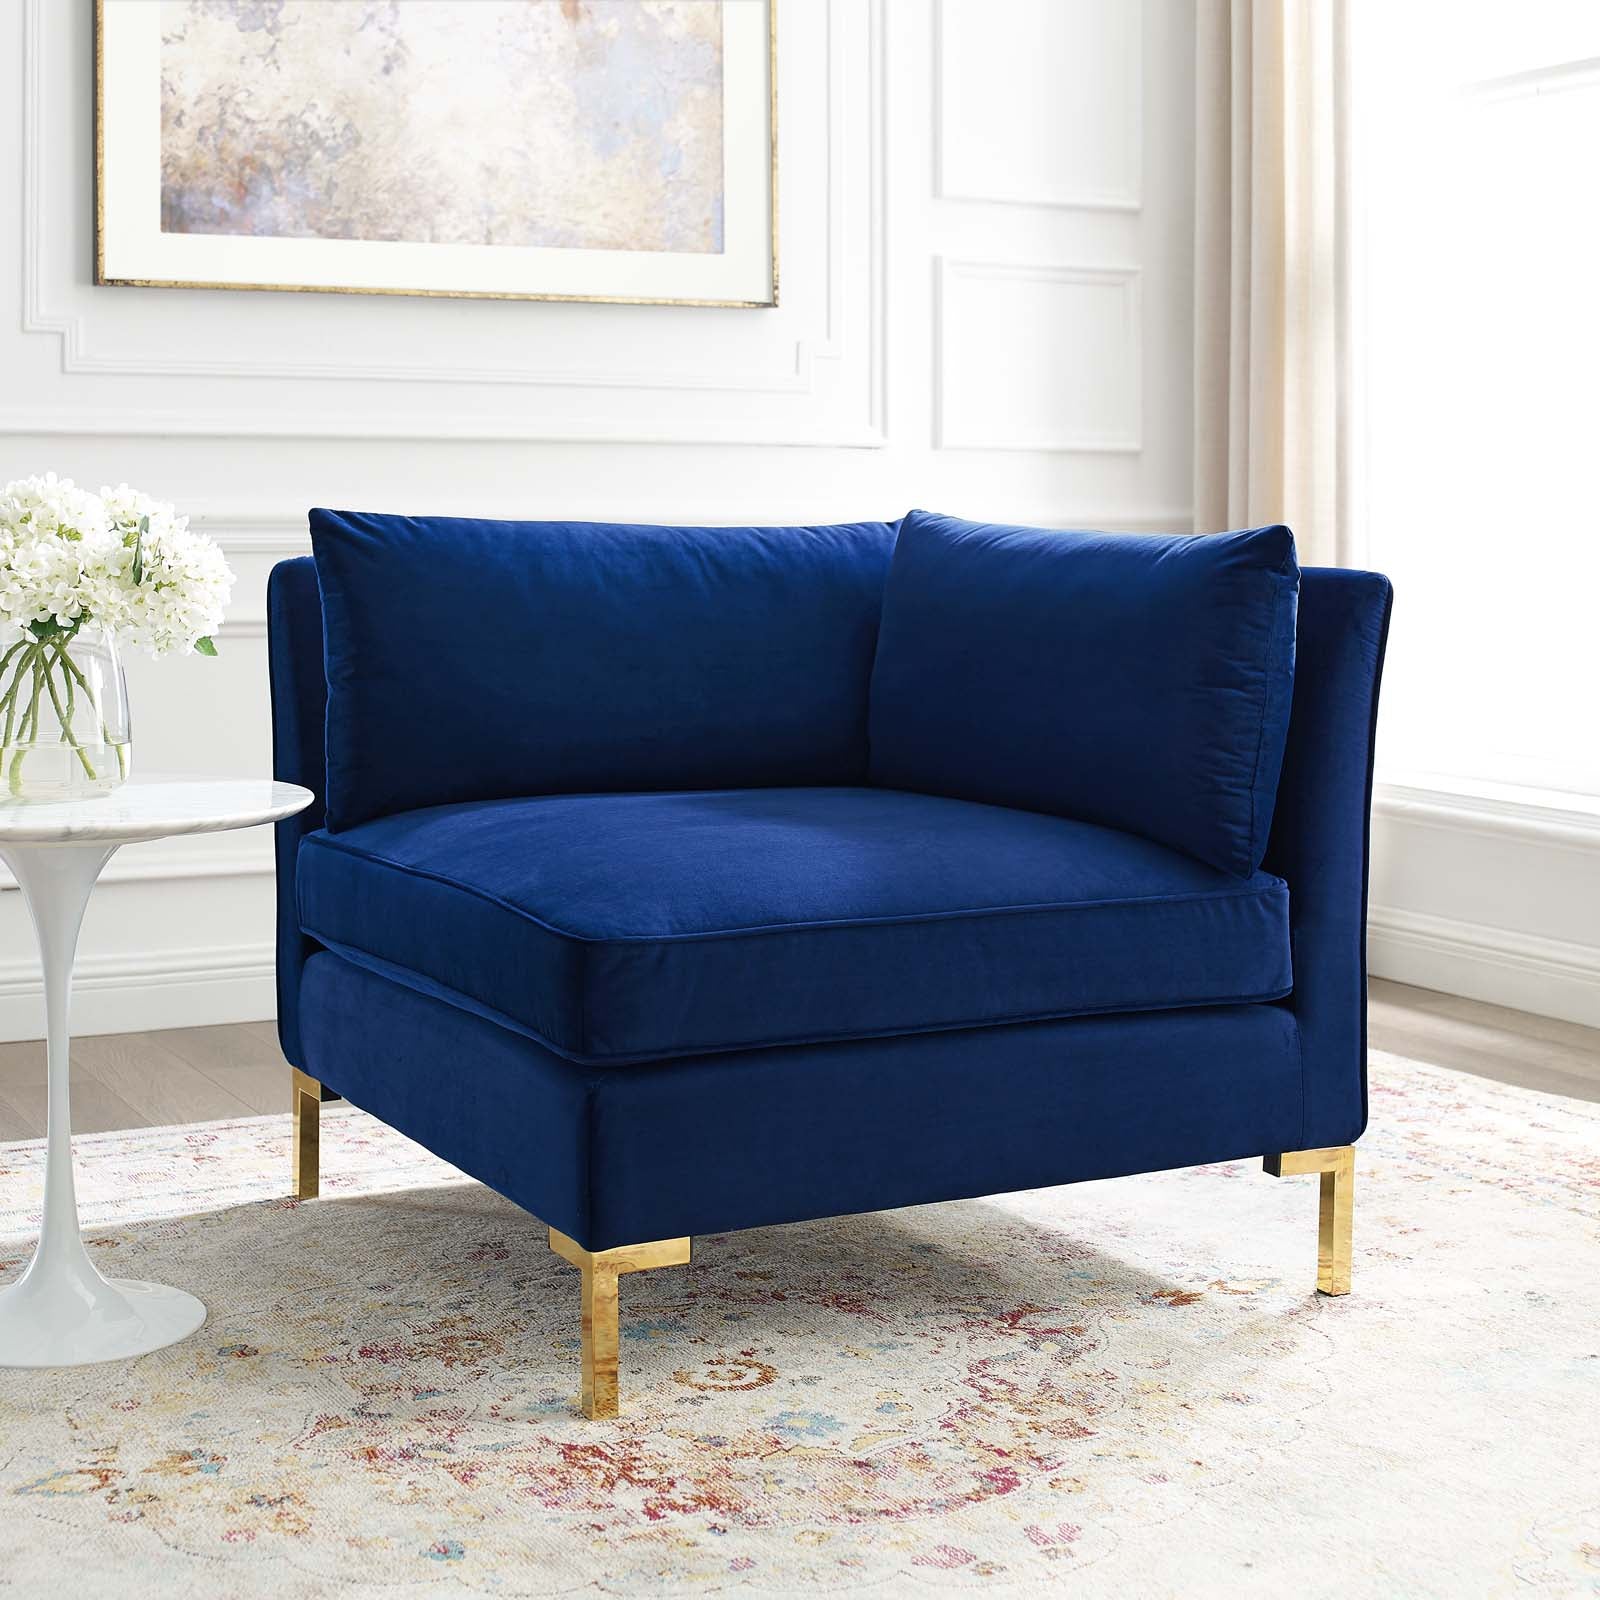 Modway Accent Chairs - Ardent Performance Velvet Sectional Sofa Corner Chair Navy